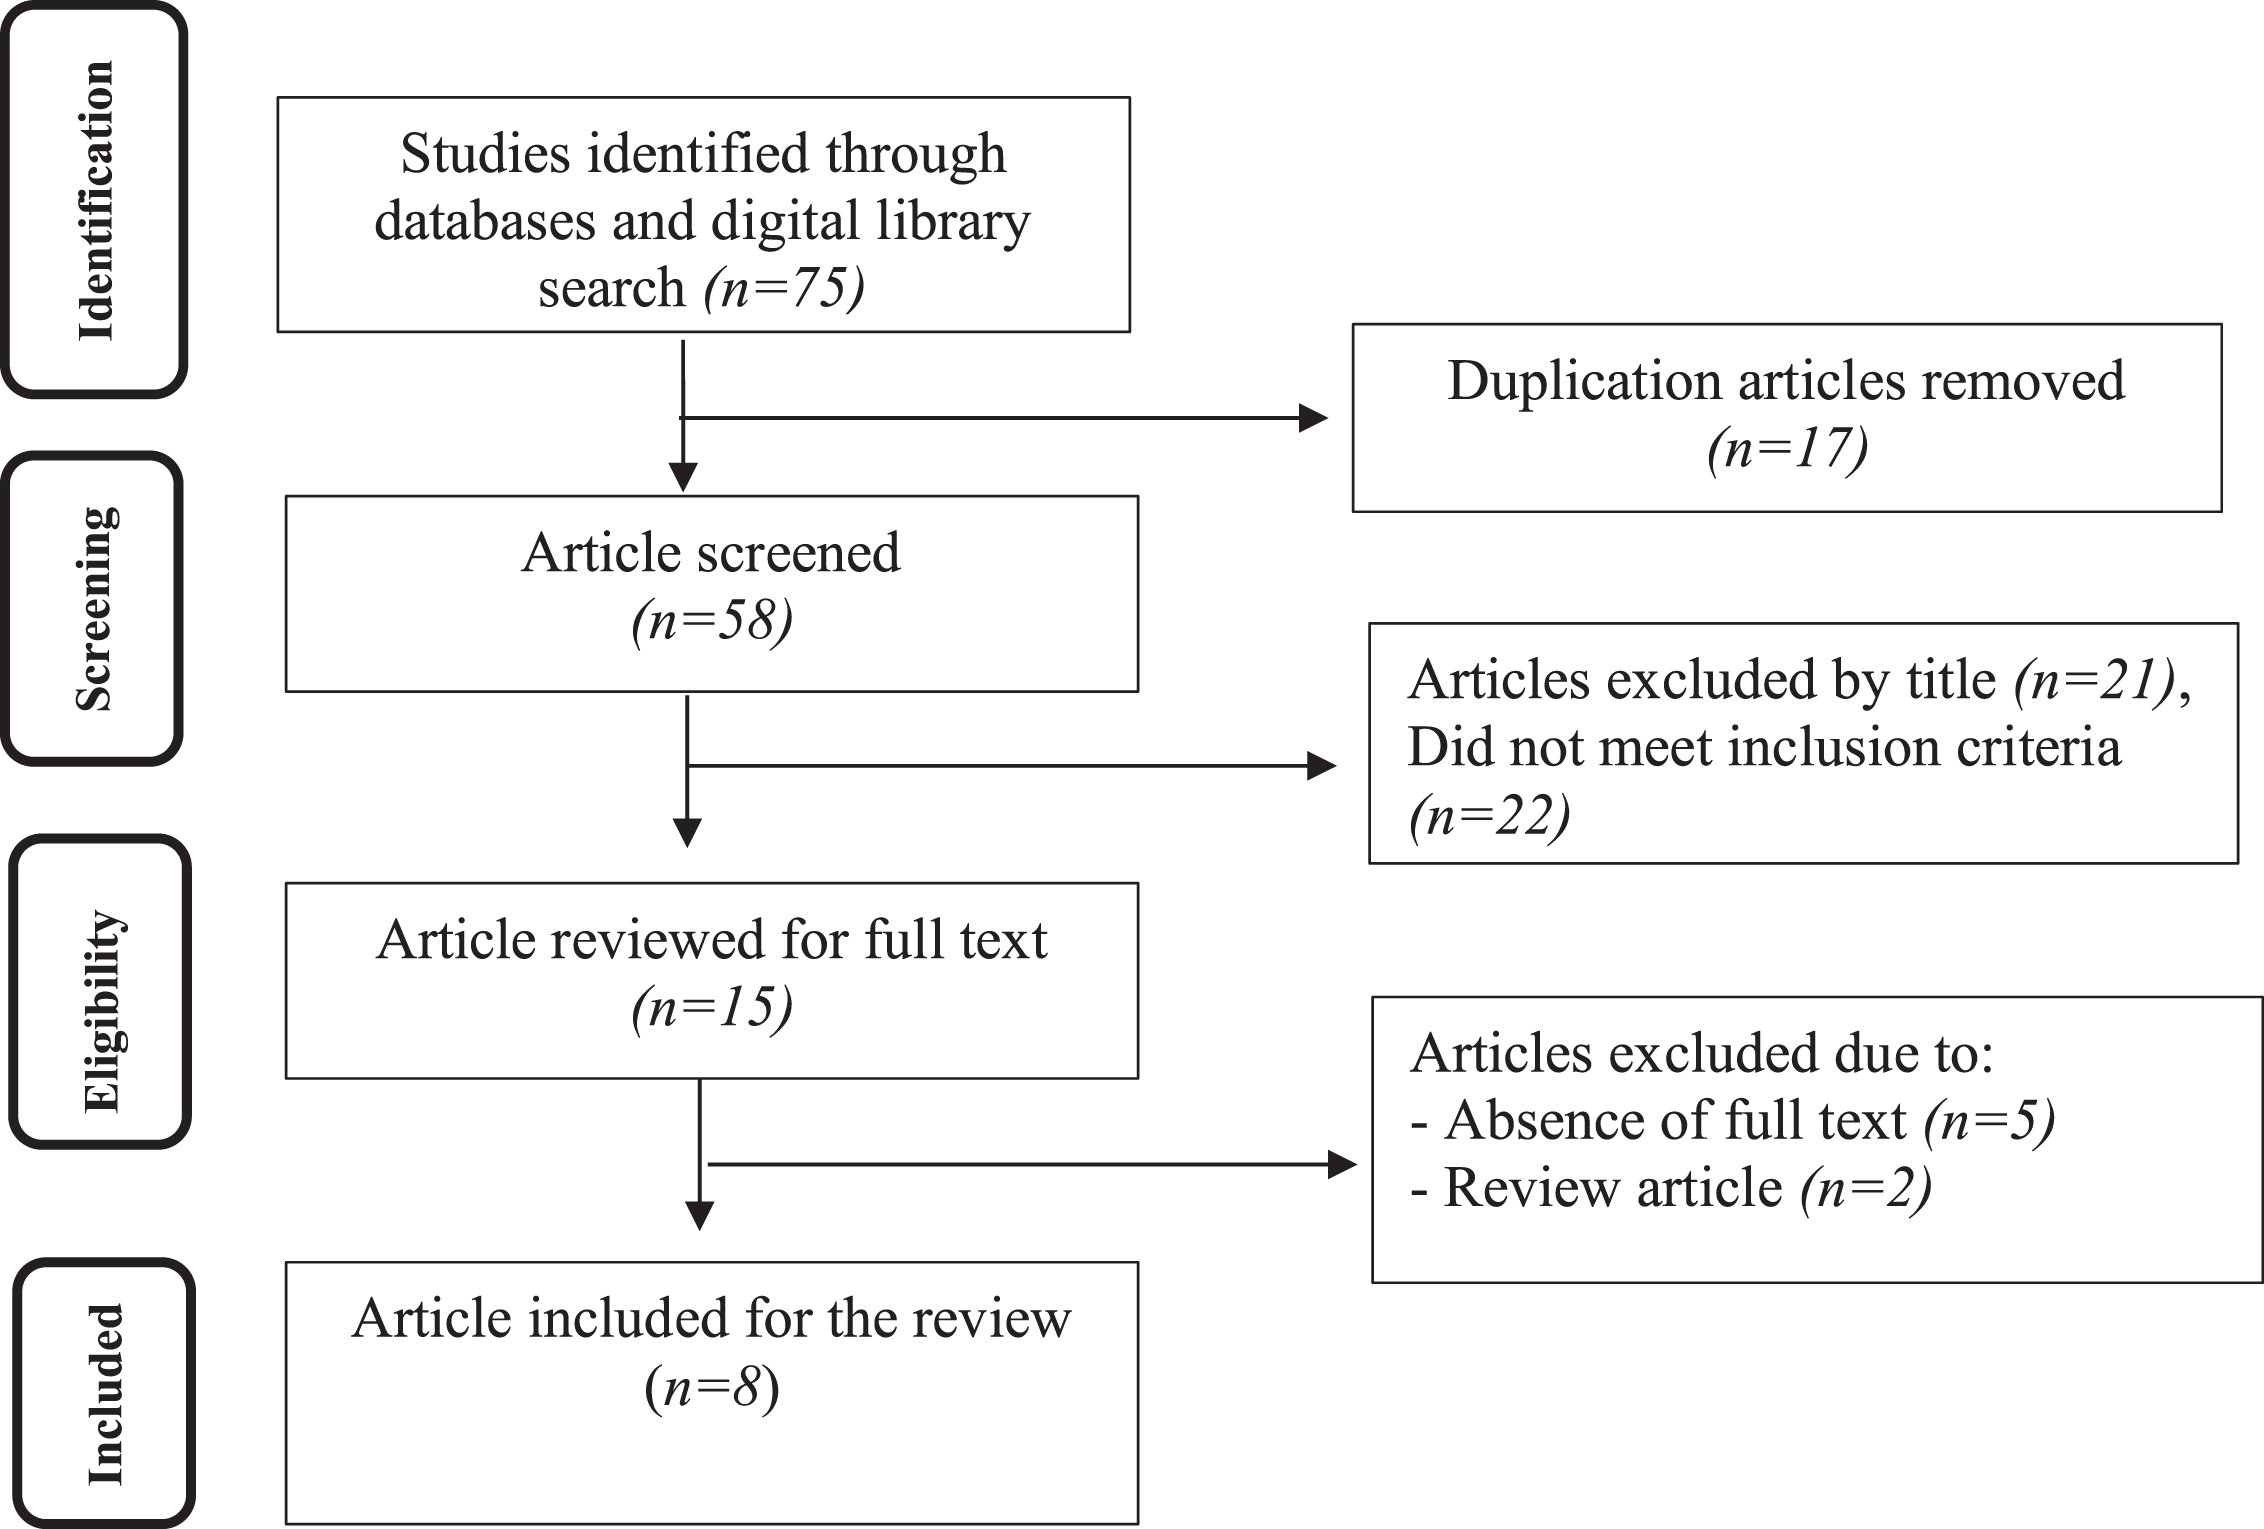 Flow diagram for the selection of the studies included in the review.